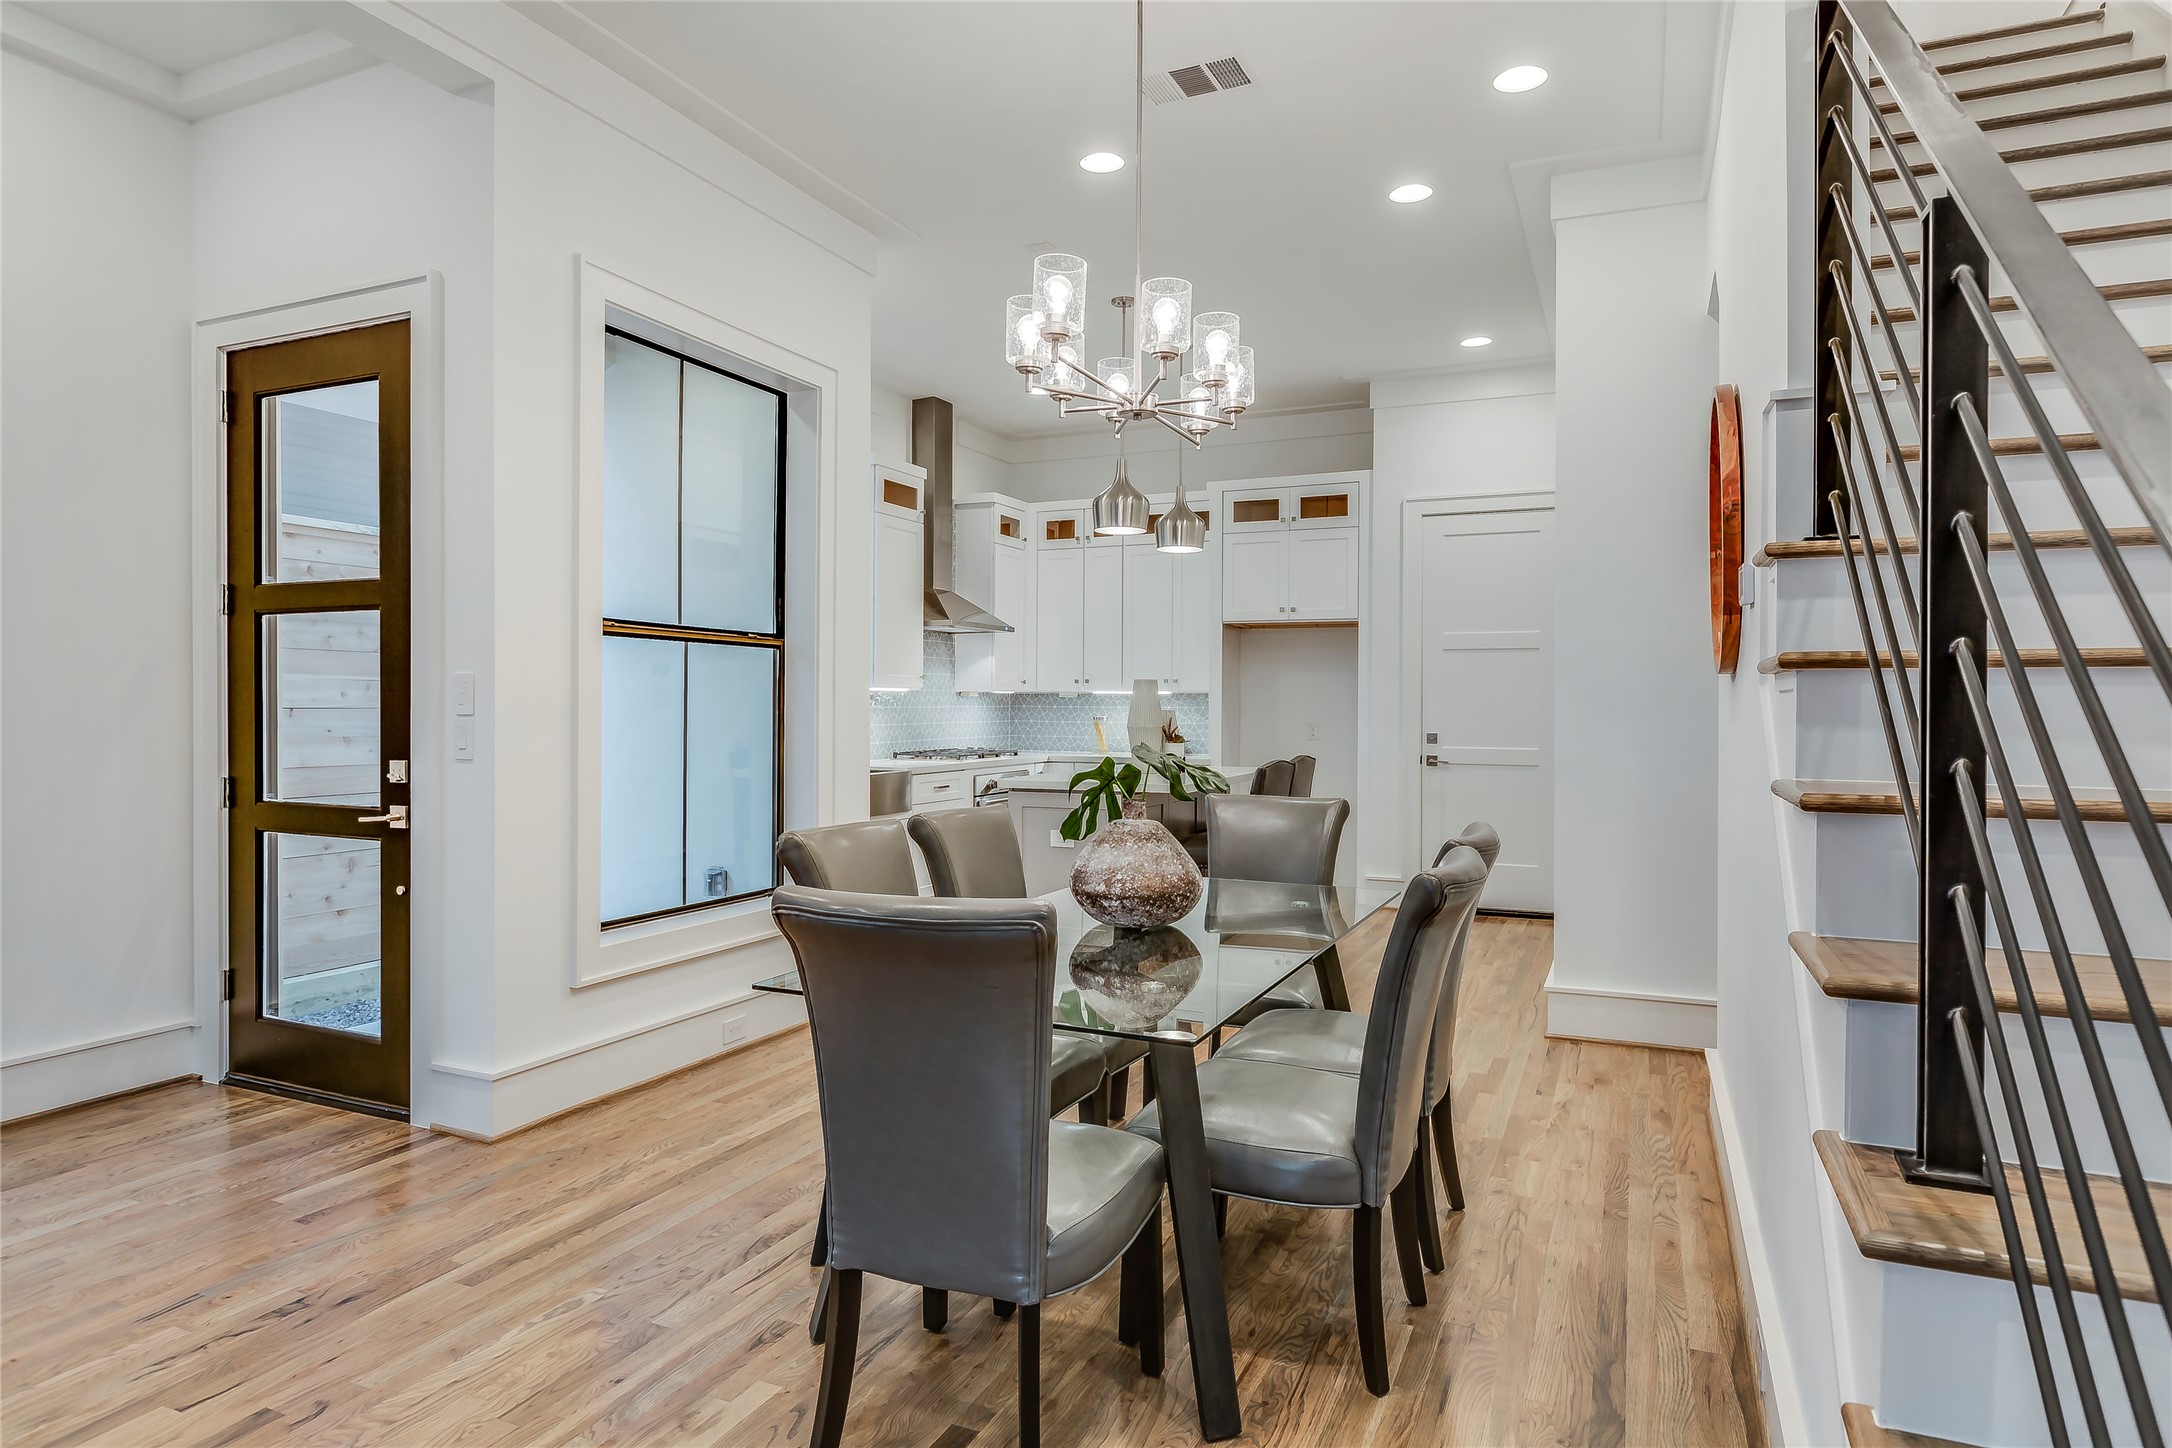 ASK ABOUT CUSTOMIZATION OPTIONS DURING CONSTRUCTION ONLY * MODEL HOME * PHOTOS MAY SHOW A SIMILAR FLOOR PLAN AND/OR UPGRADED/ALTERNATIVE FINISHES * Please use these photos as a guide *THIS IS AN ACTIVE CONSTRUCTION SITE, BUYERS MUST REQUEST APPOINTMENT TO BE ON PREMISE AT ALL TIMES.